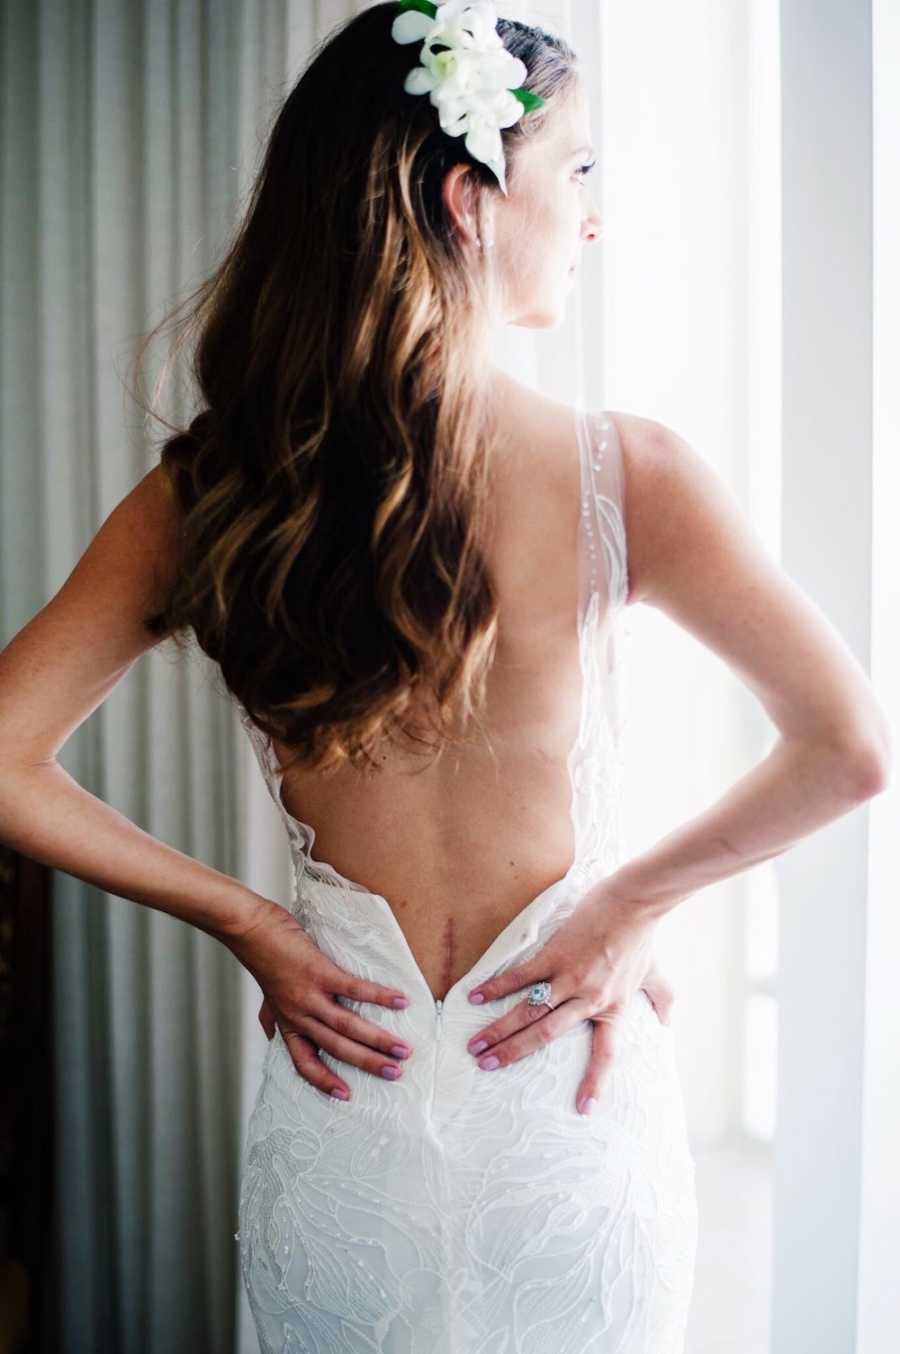 Woman stands in wedding gown with dressed not fully zipped to show scar from spinal surgery